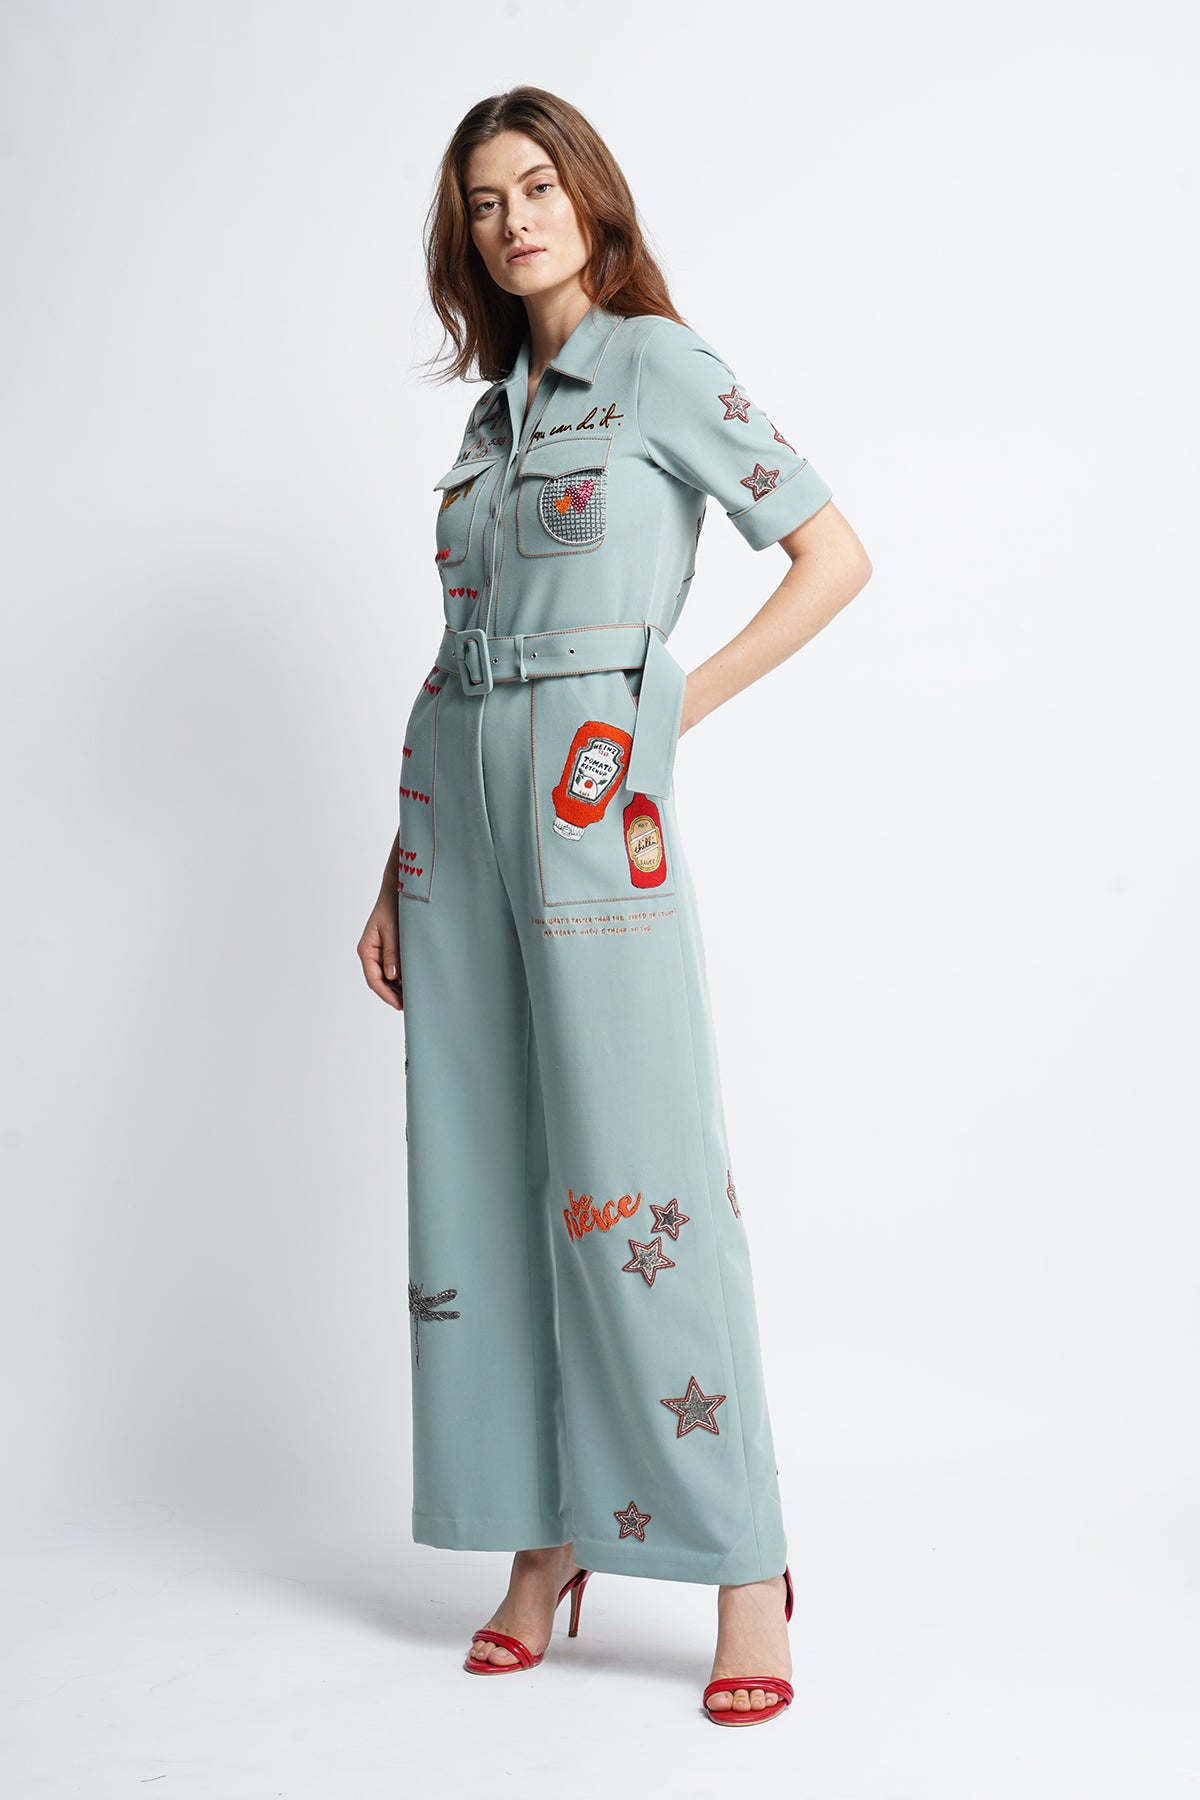 Numbers Text And Sauce Bottle Jumpsuit With Belt